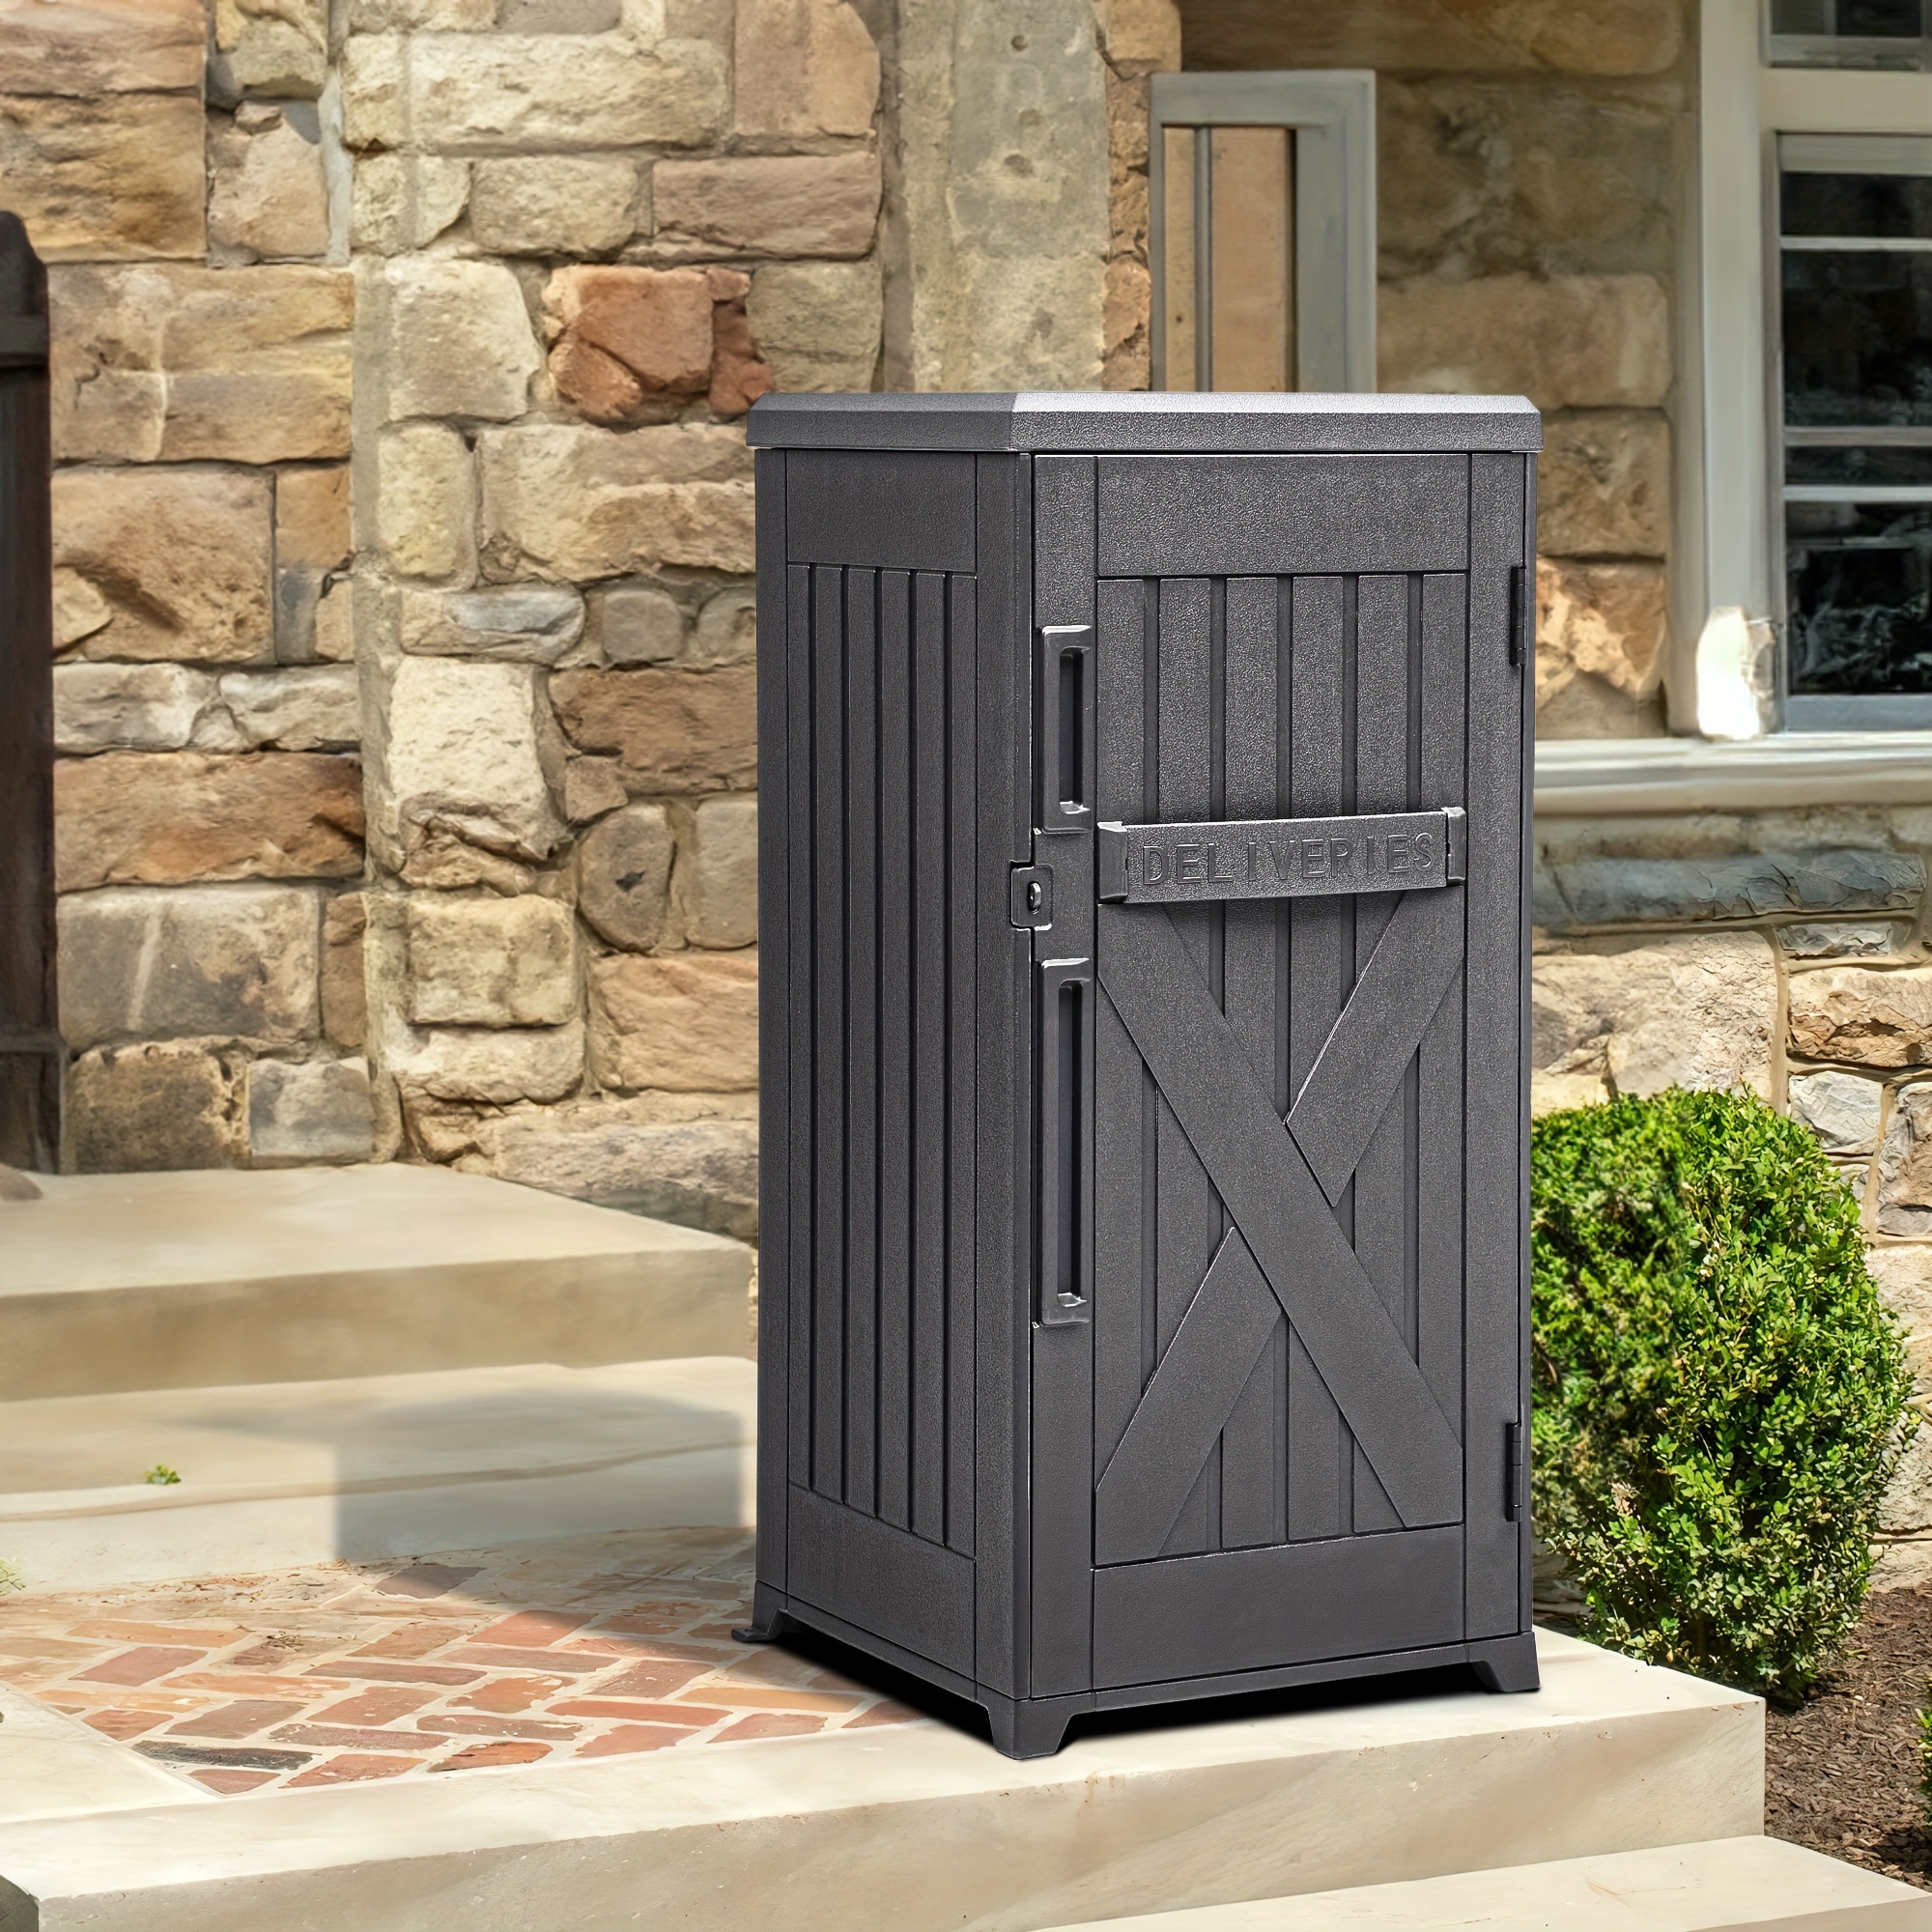 

60 Gallon Large Package Delivery And Storage Box With Lockable Secure, Double-wall Resin Outdoor Package Delivery And Waterproof Deck Box For Porch, Curbside, 8.5 Cubic Feet, Gray